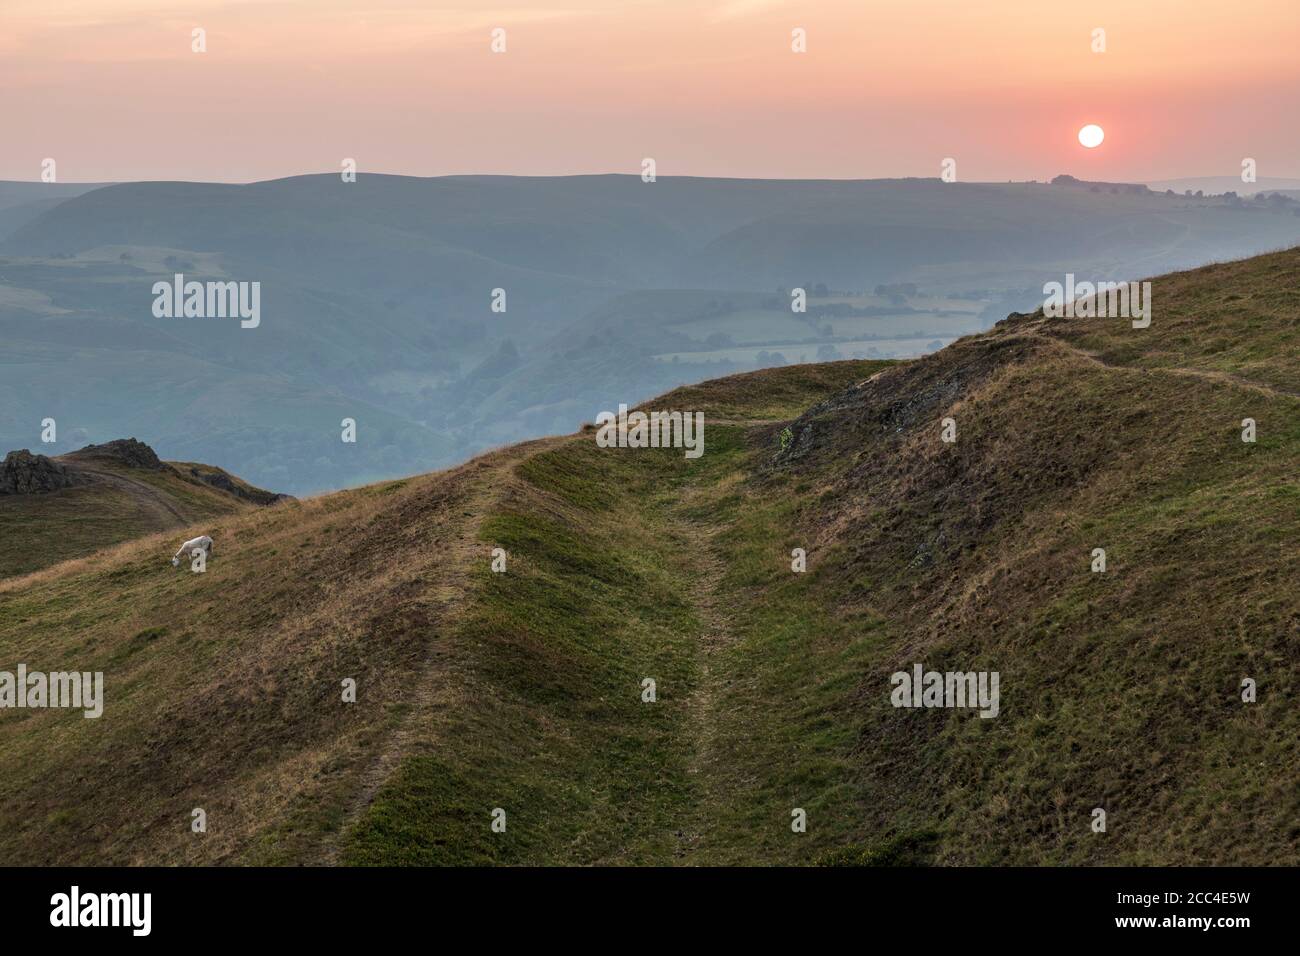 View along one of the defensive ditches of Caer Caradoc hillfort at sunset, Shropshire hills near Church Stretton Stock Photo